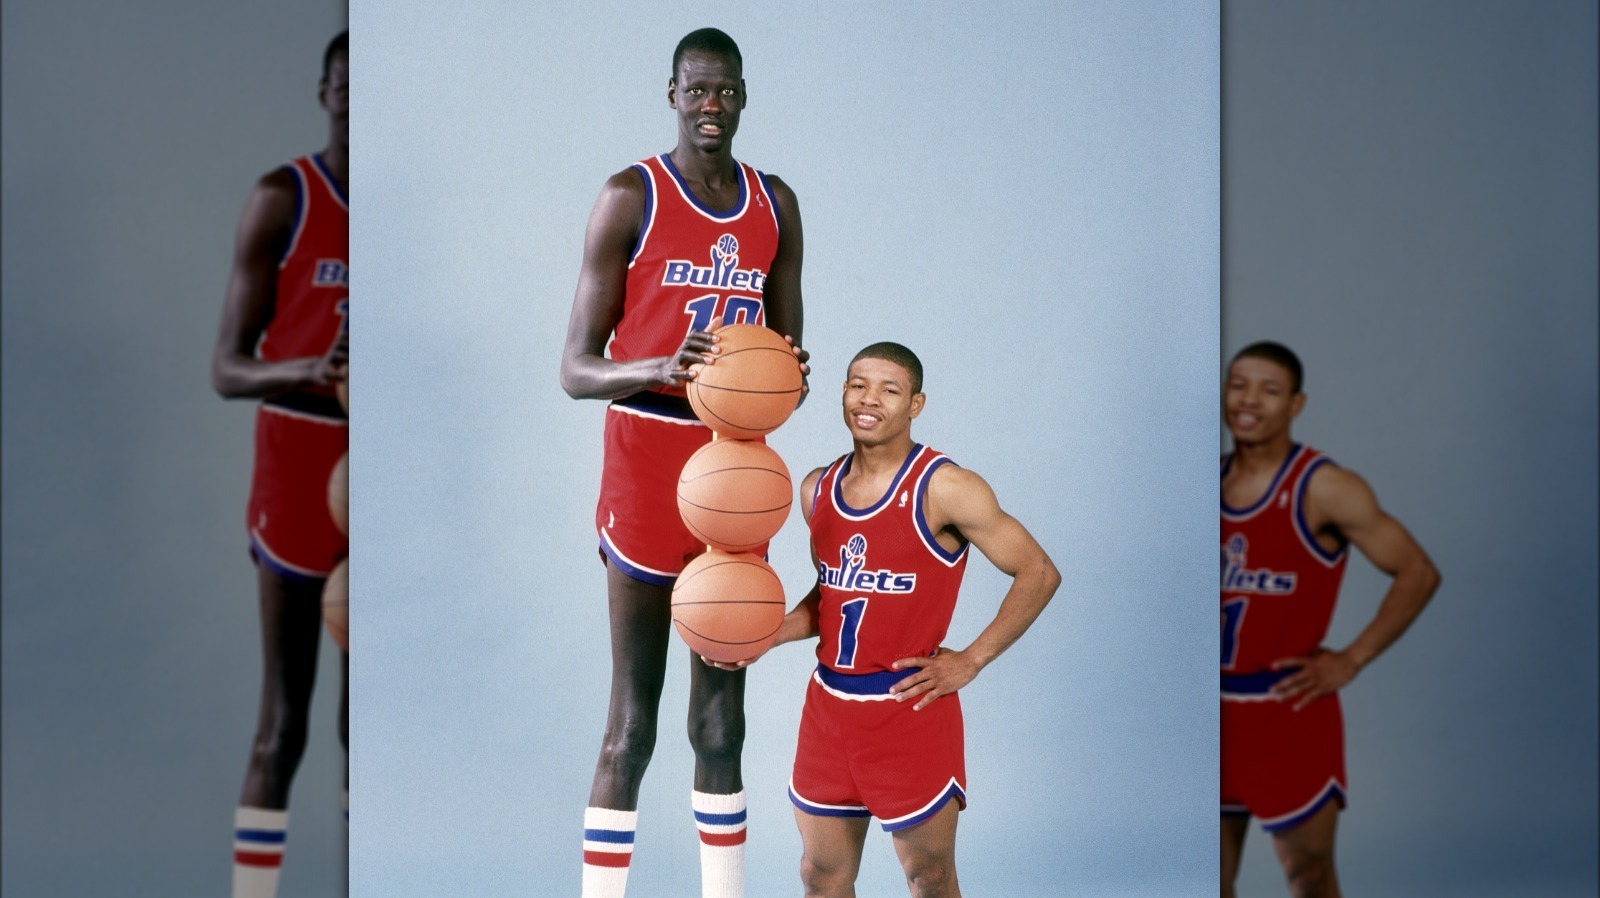 Inside The Friendship Between The NBA's Tallest And Shortest Players